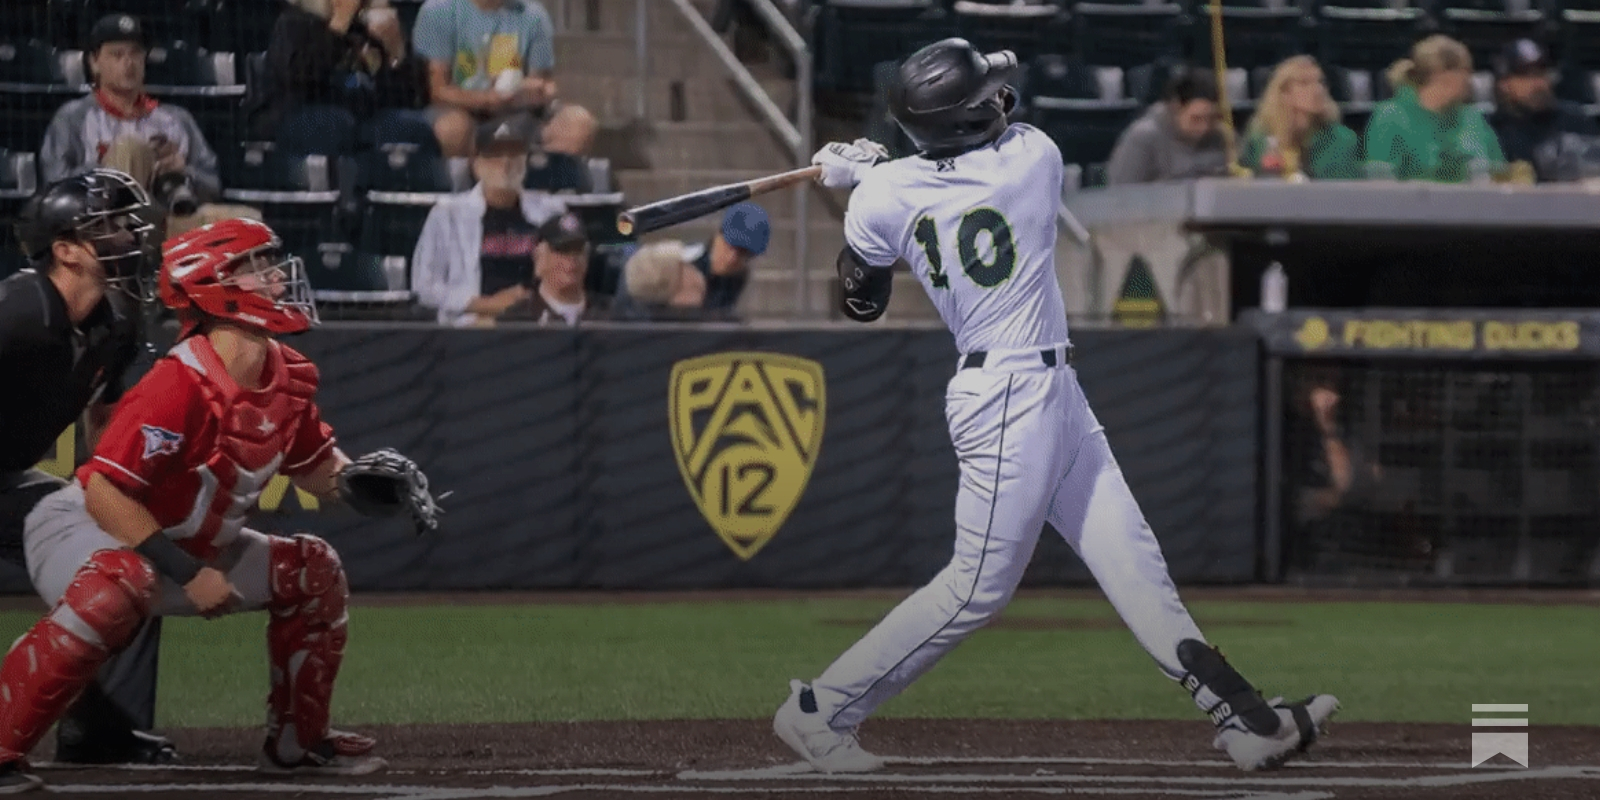 Eugene Emeralds on Twitter: Marco Luciano hit his second grand